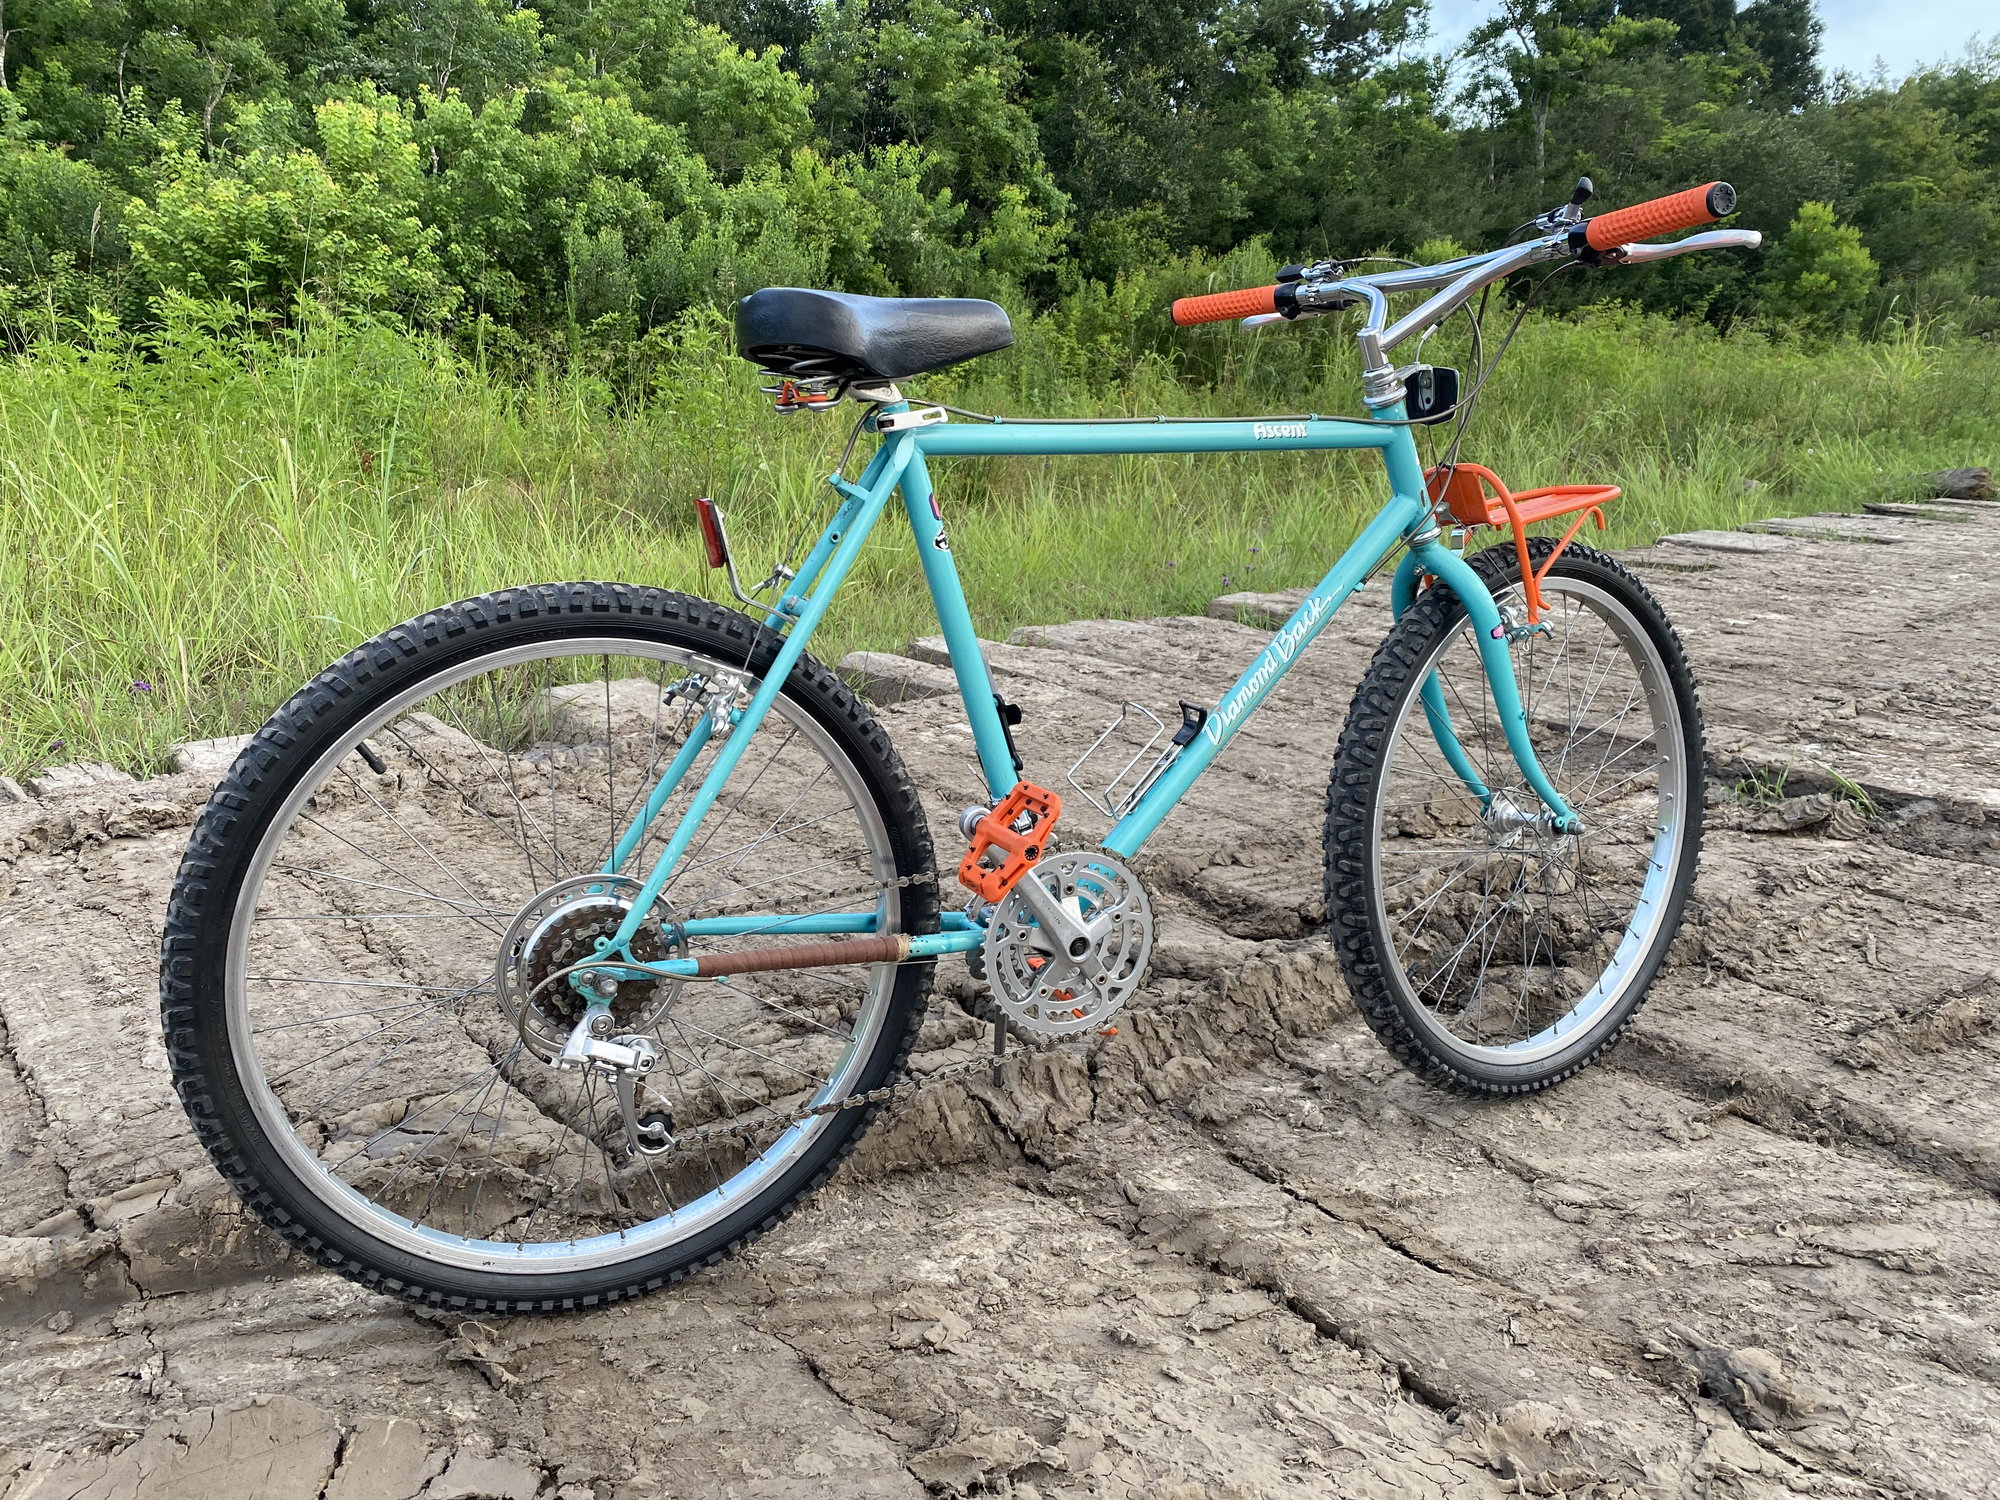 Show us your vintage mountain bikes! - Page 315 - Bike Forums